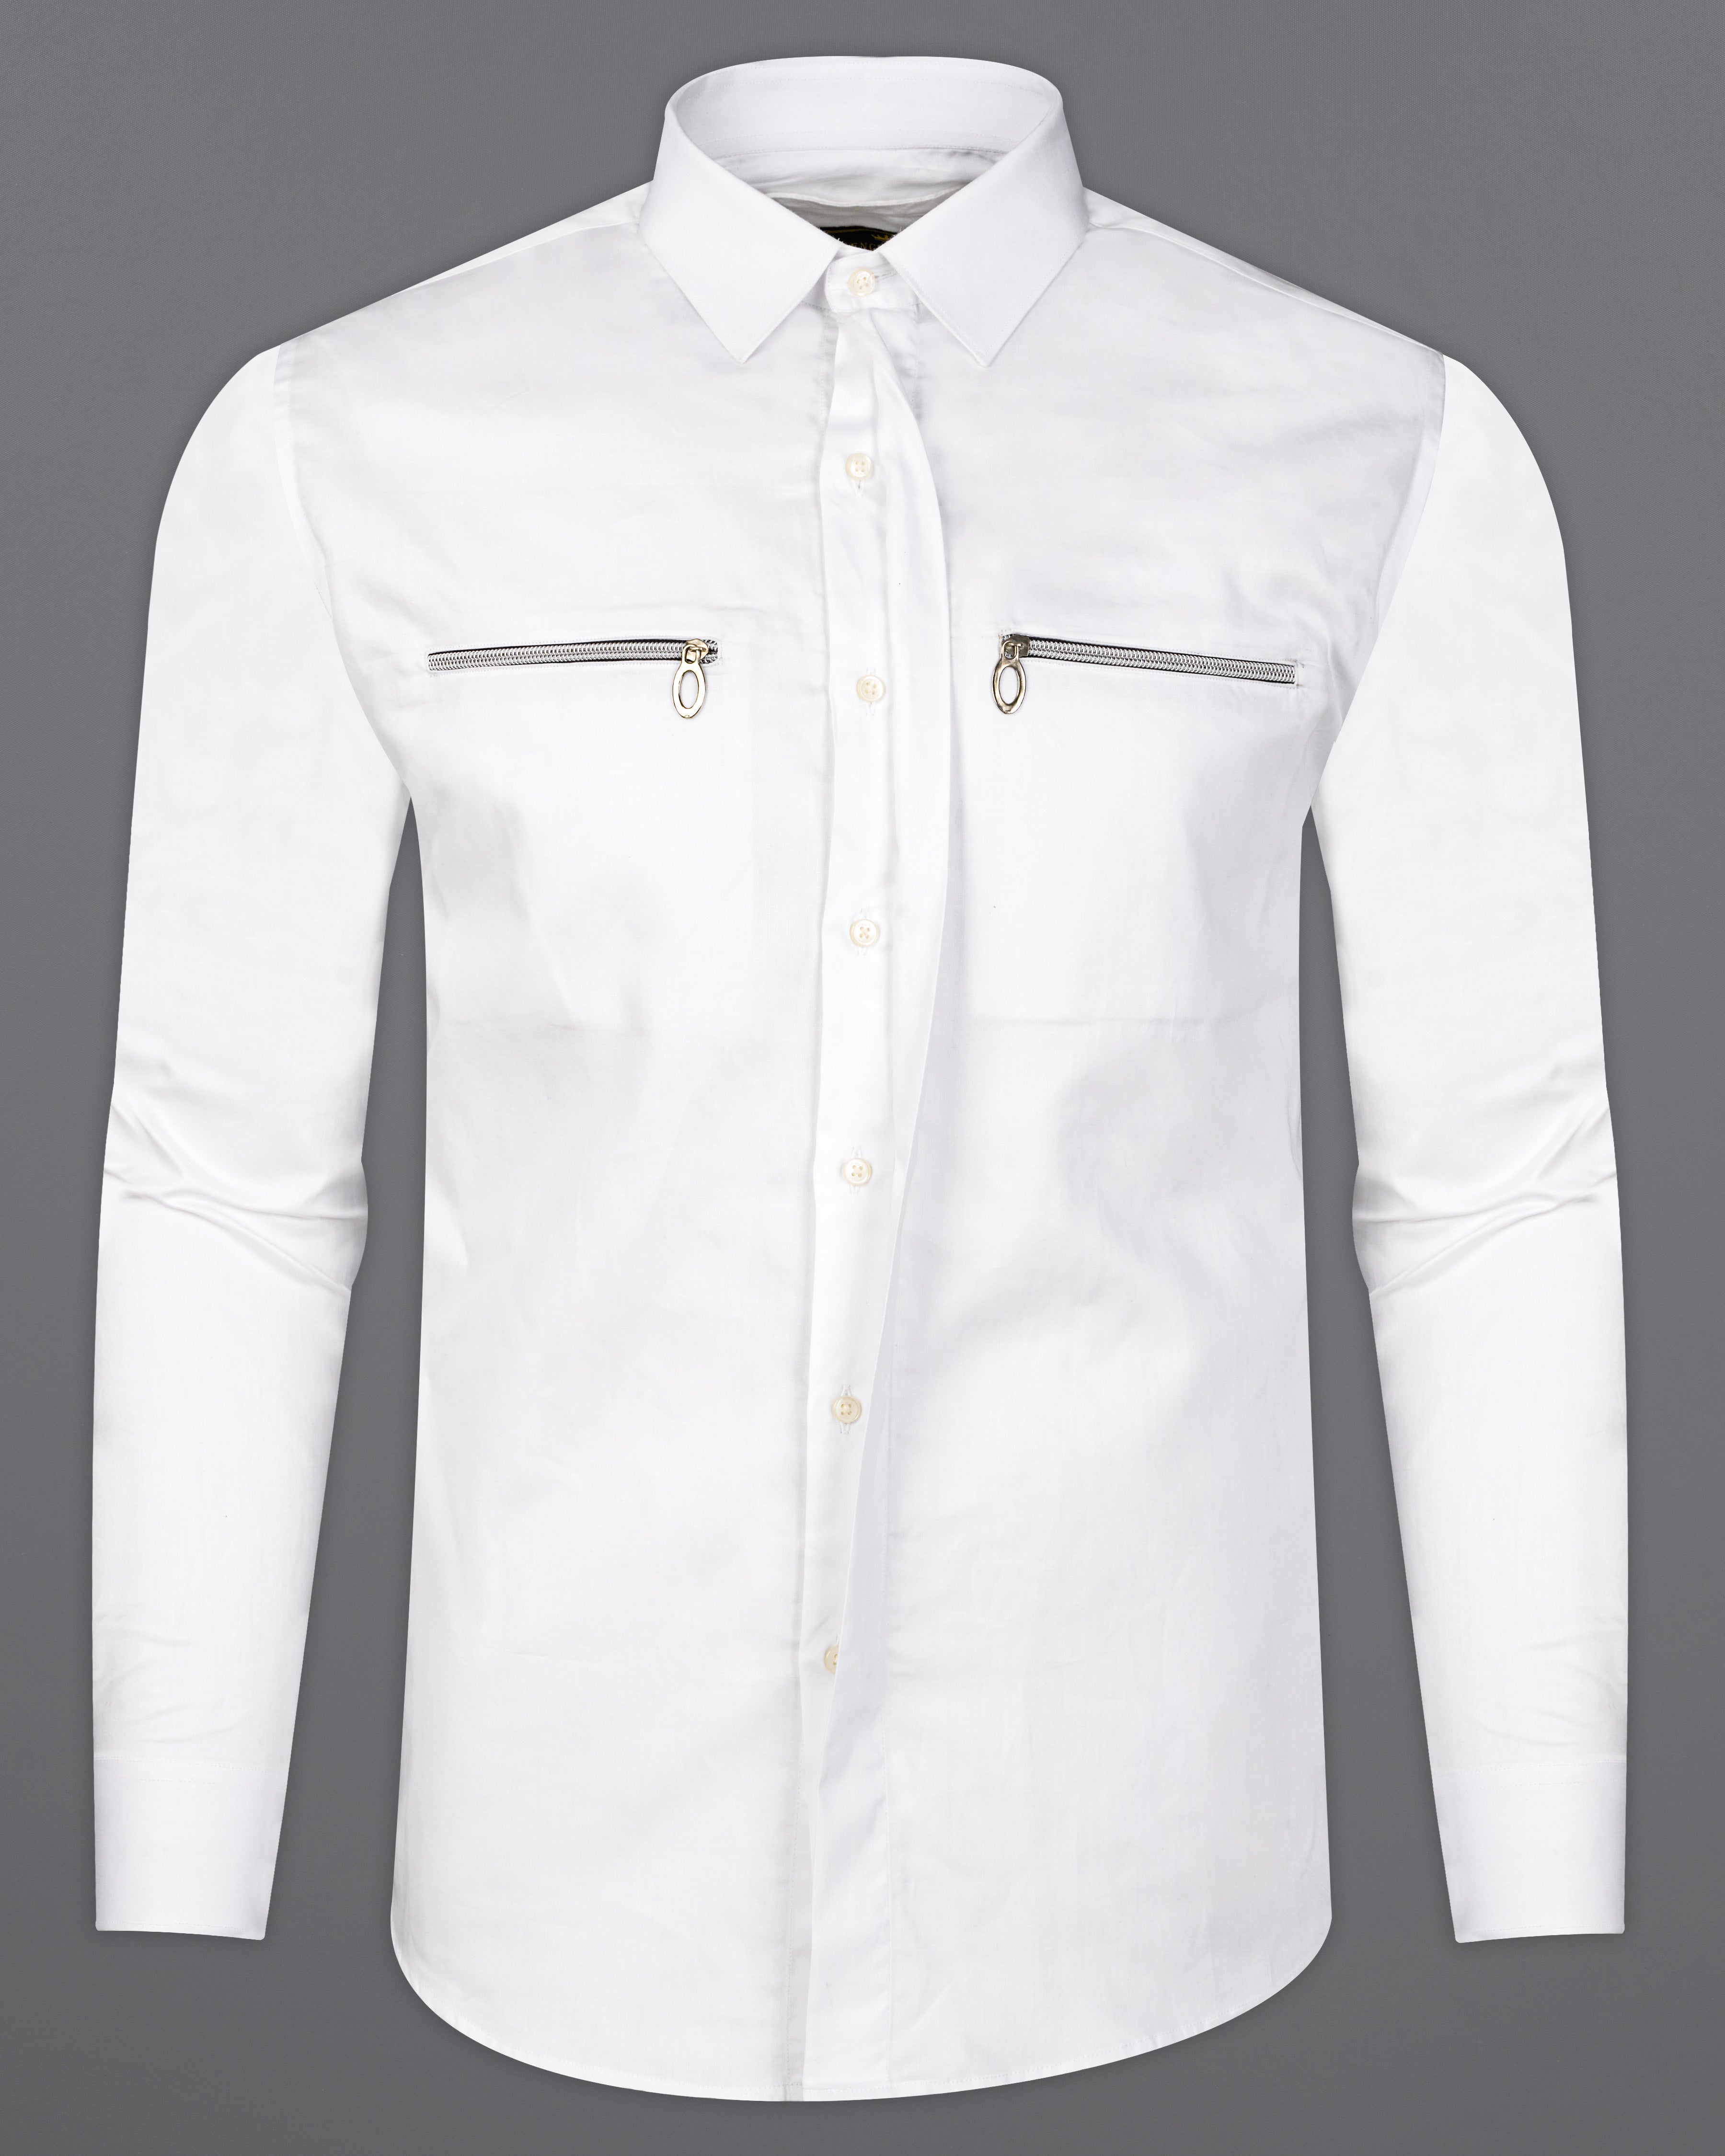 CP BRO Men Solid Casual White Shirt - Buy CP BRO Men Solid Casual White  Shirt Online at Best Prices in India